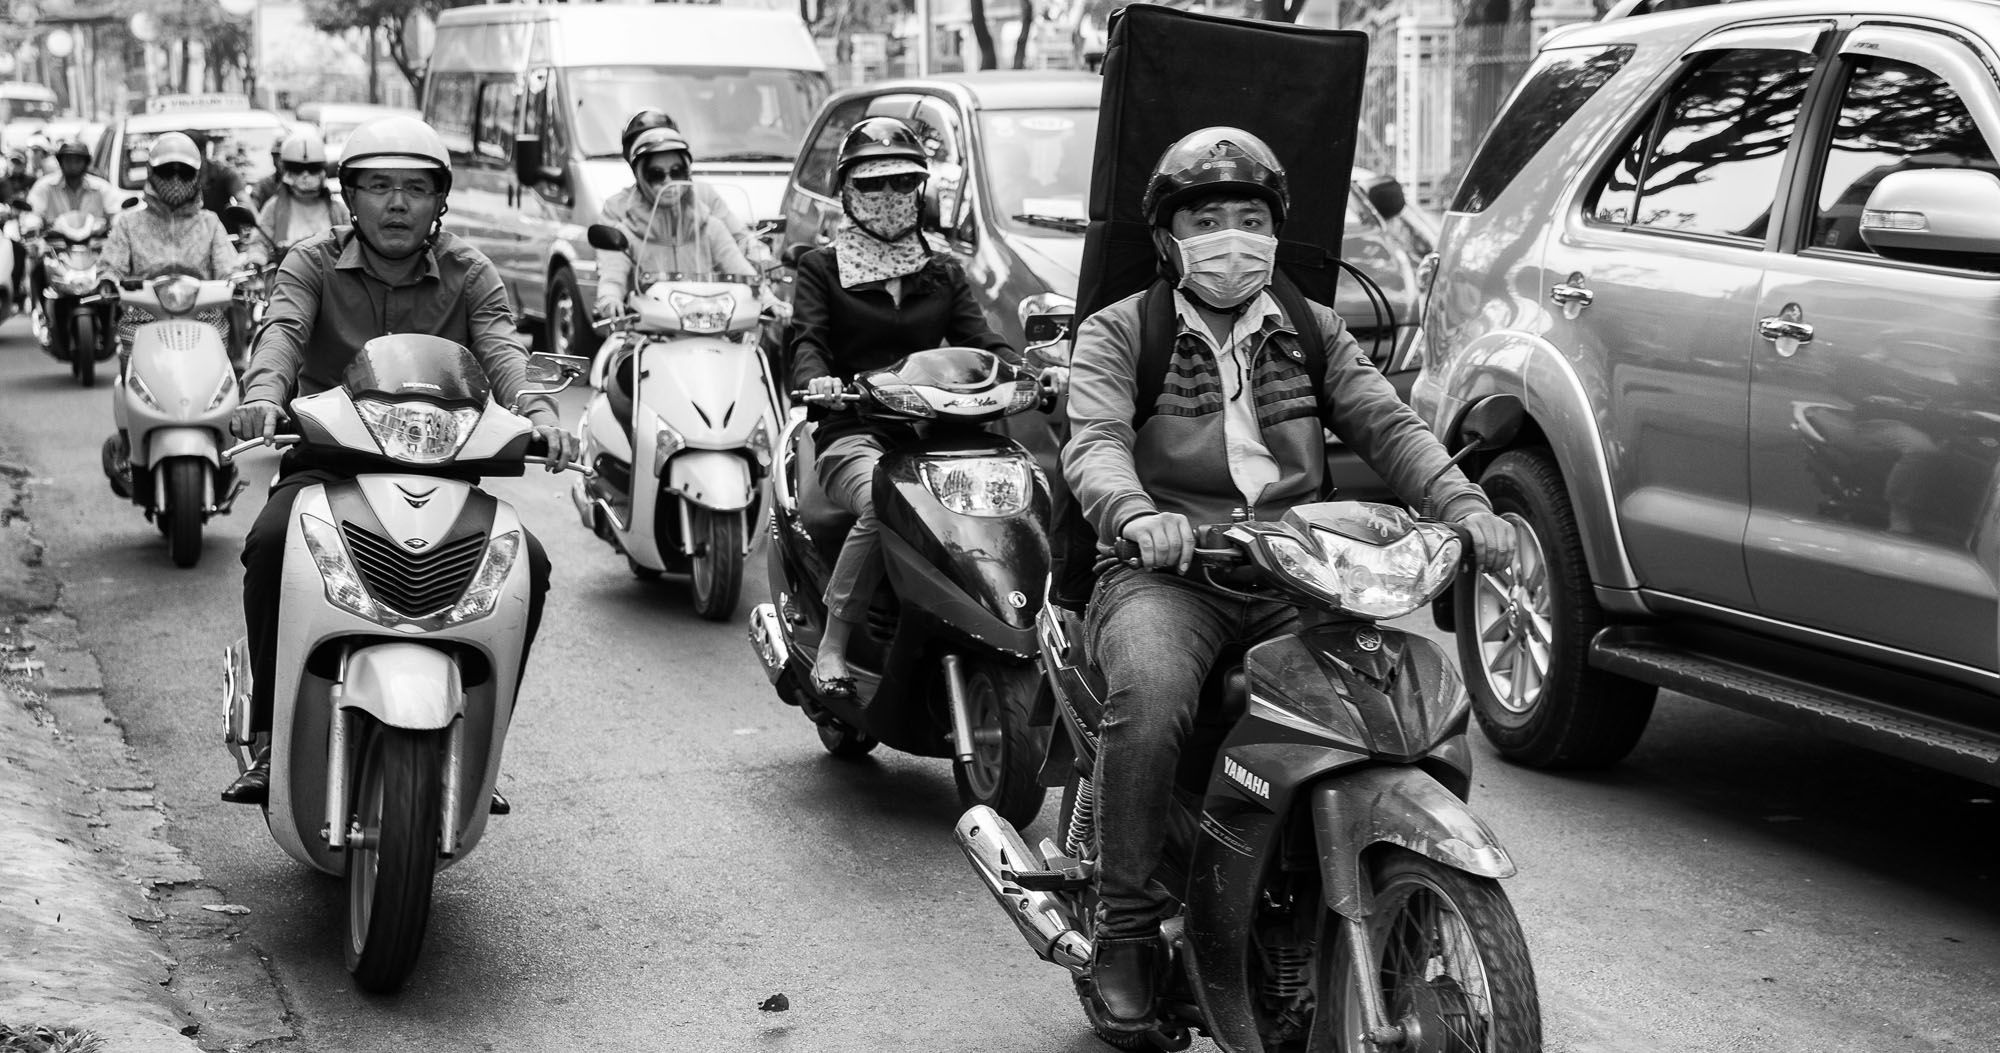 Featured image for “Vietnam on Motorbike”